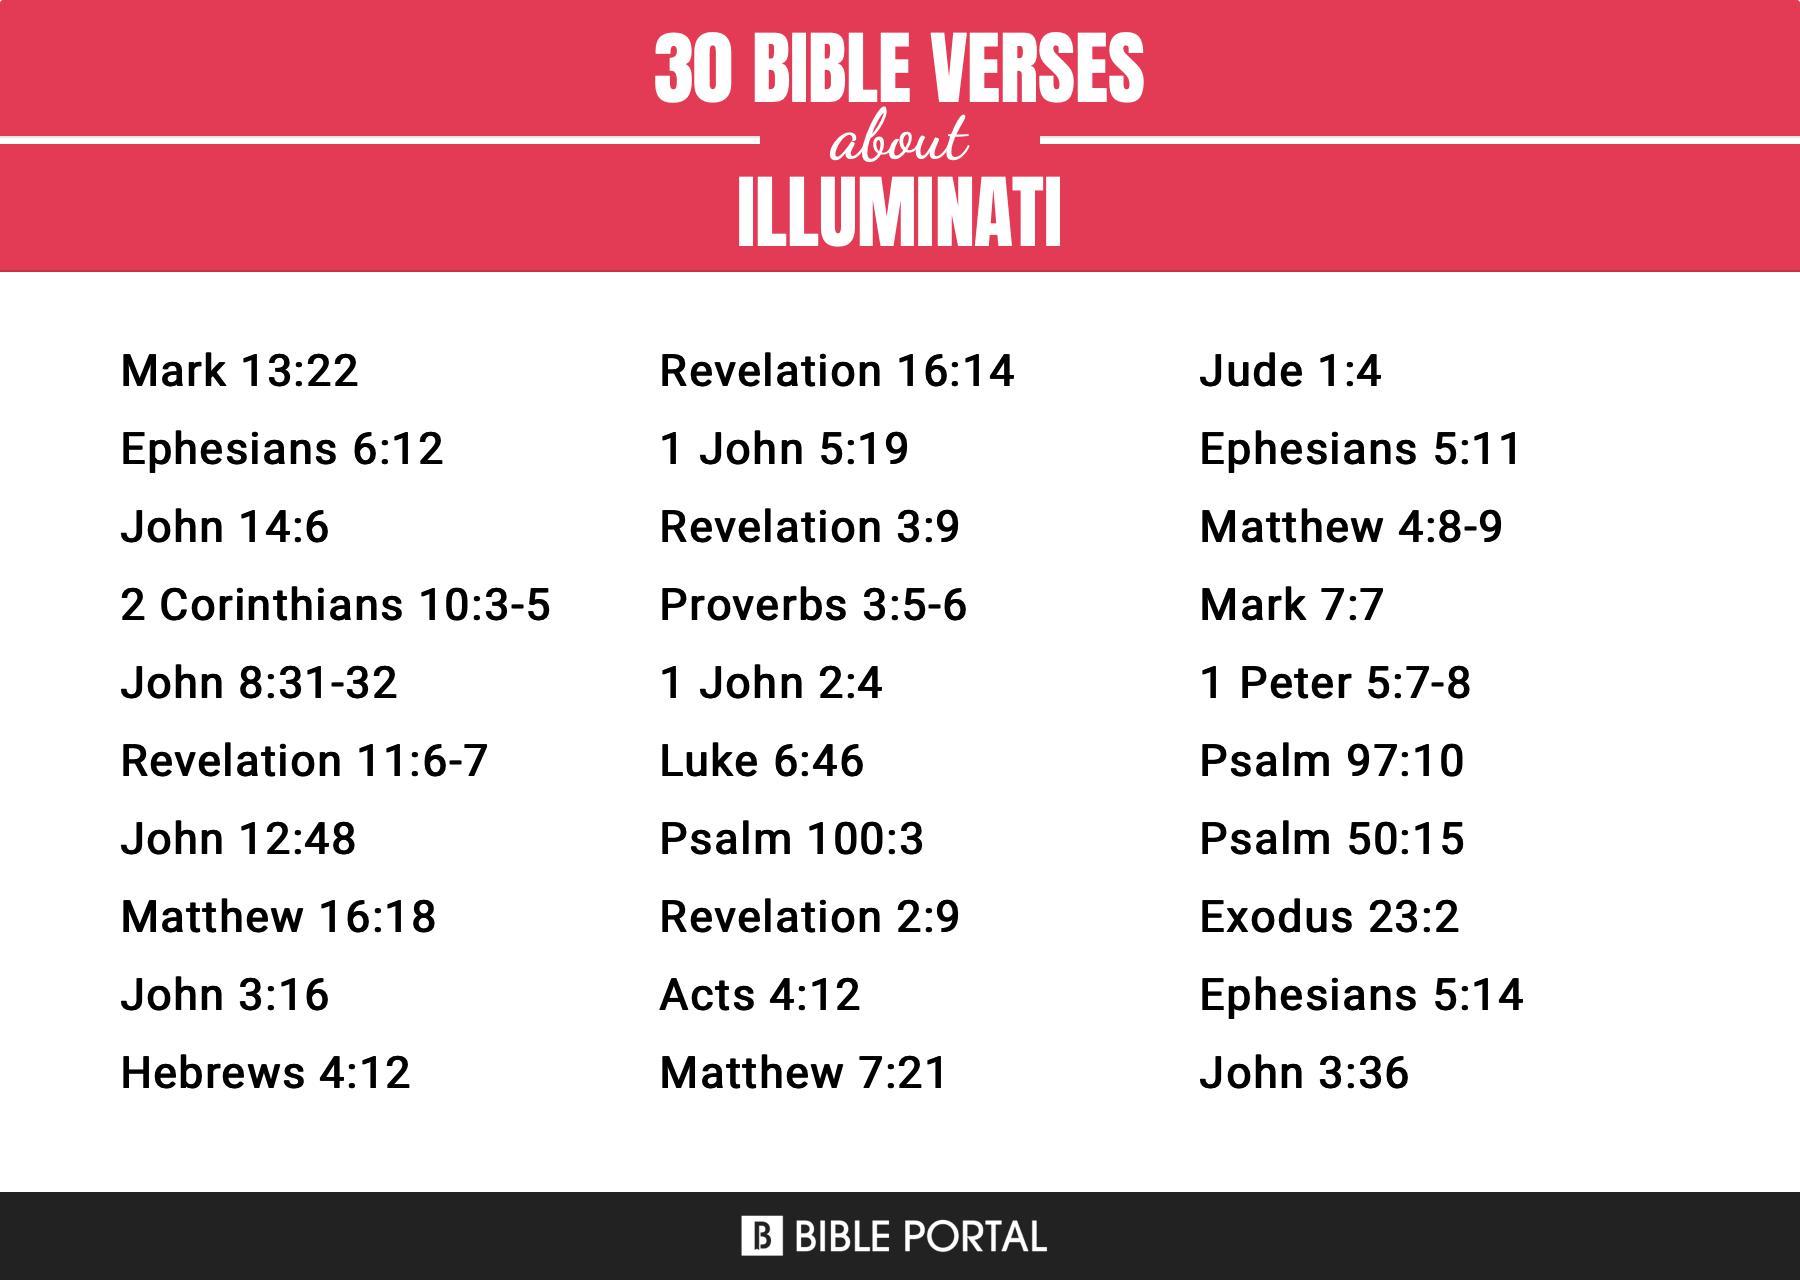 What Does the Bible Say about Illuminati?